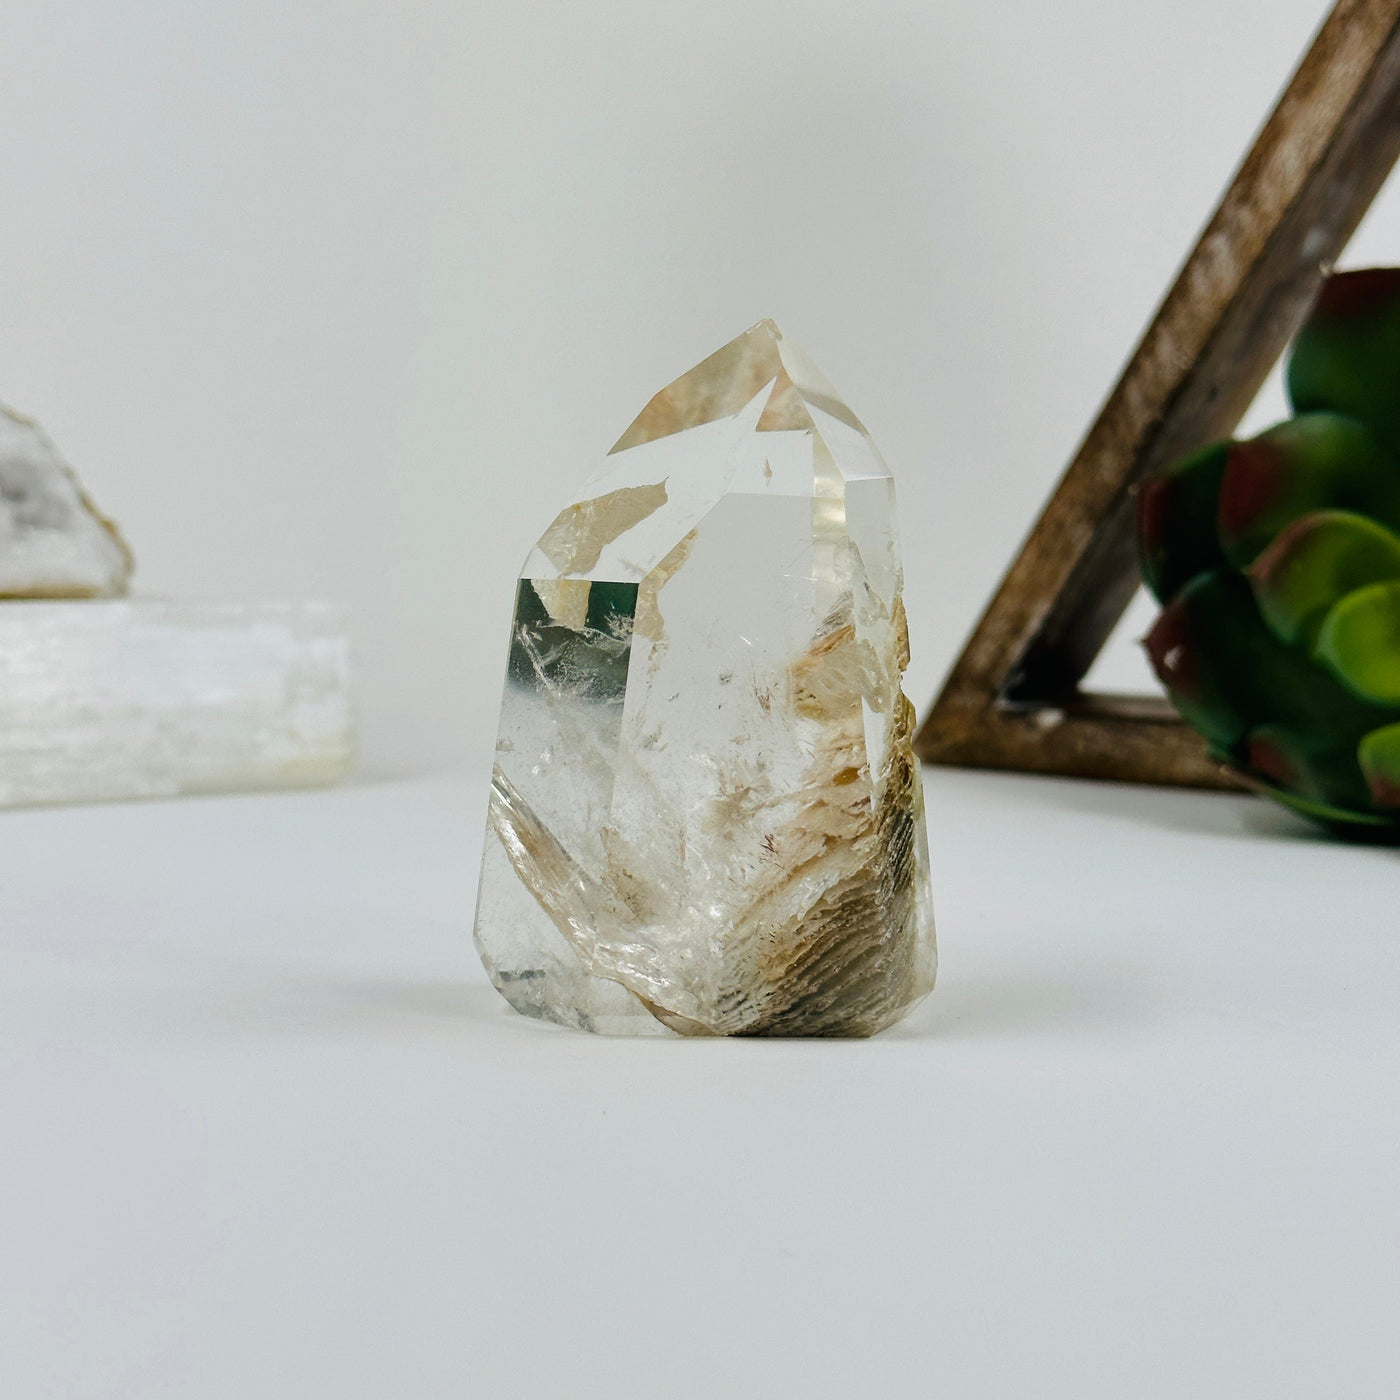 Polished lodalite point with decorations in the background